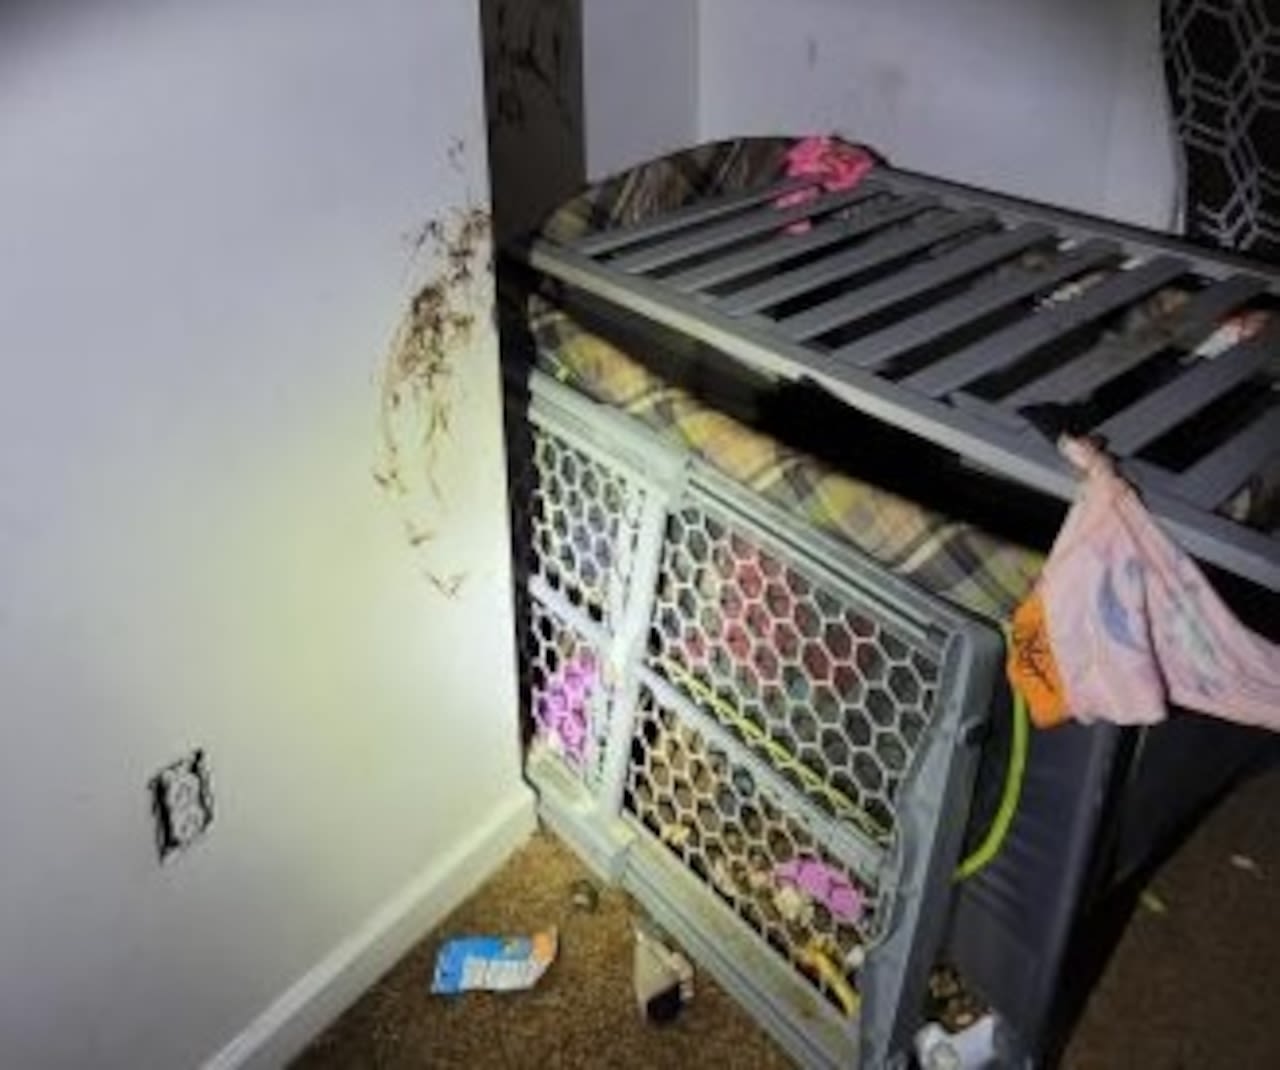 Boy,2, found in makeshift feces-covered cage in Buffalo; mother arrested: Report